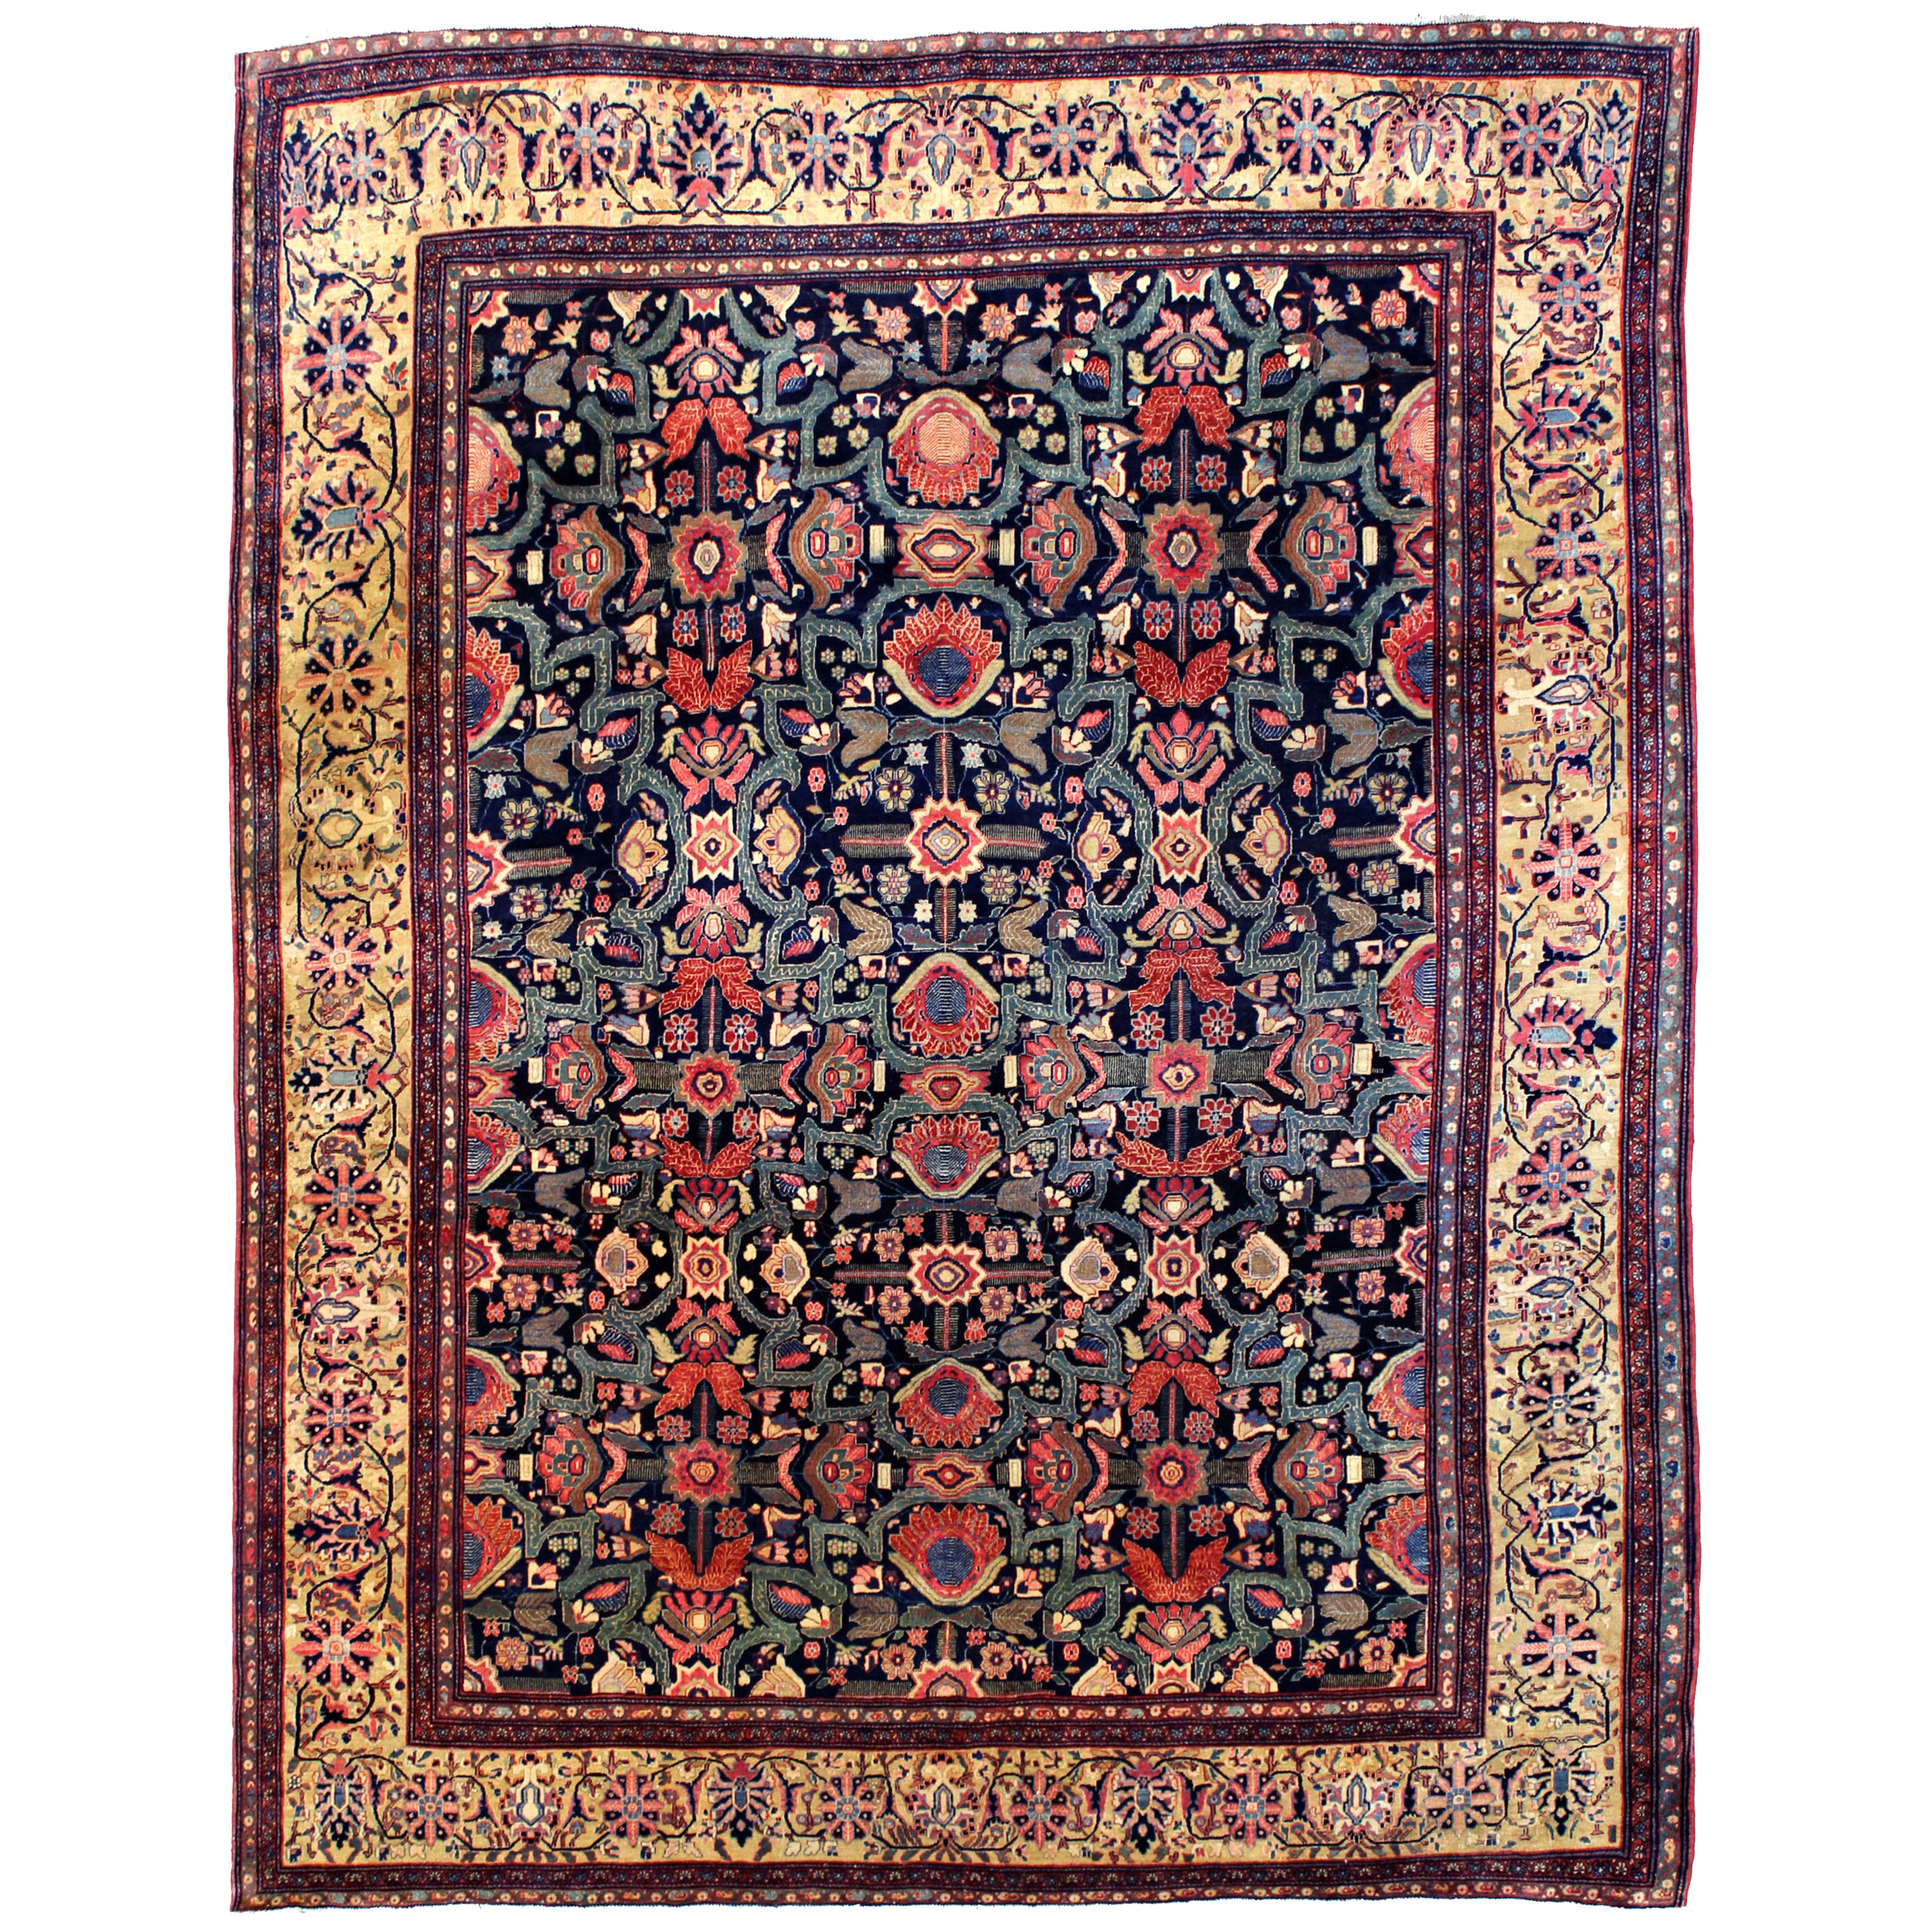 Antique Persian Fereghan Sarouk carpet with a navy blue field decorated with flowers and strapwork and framed by a camel color border